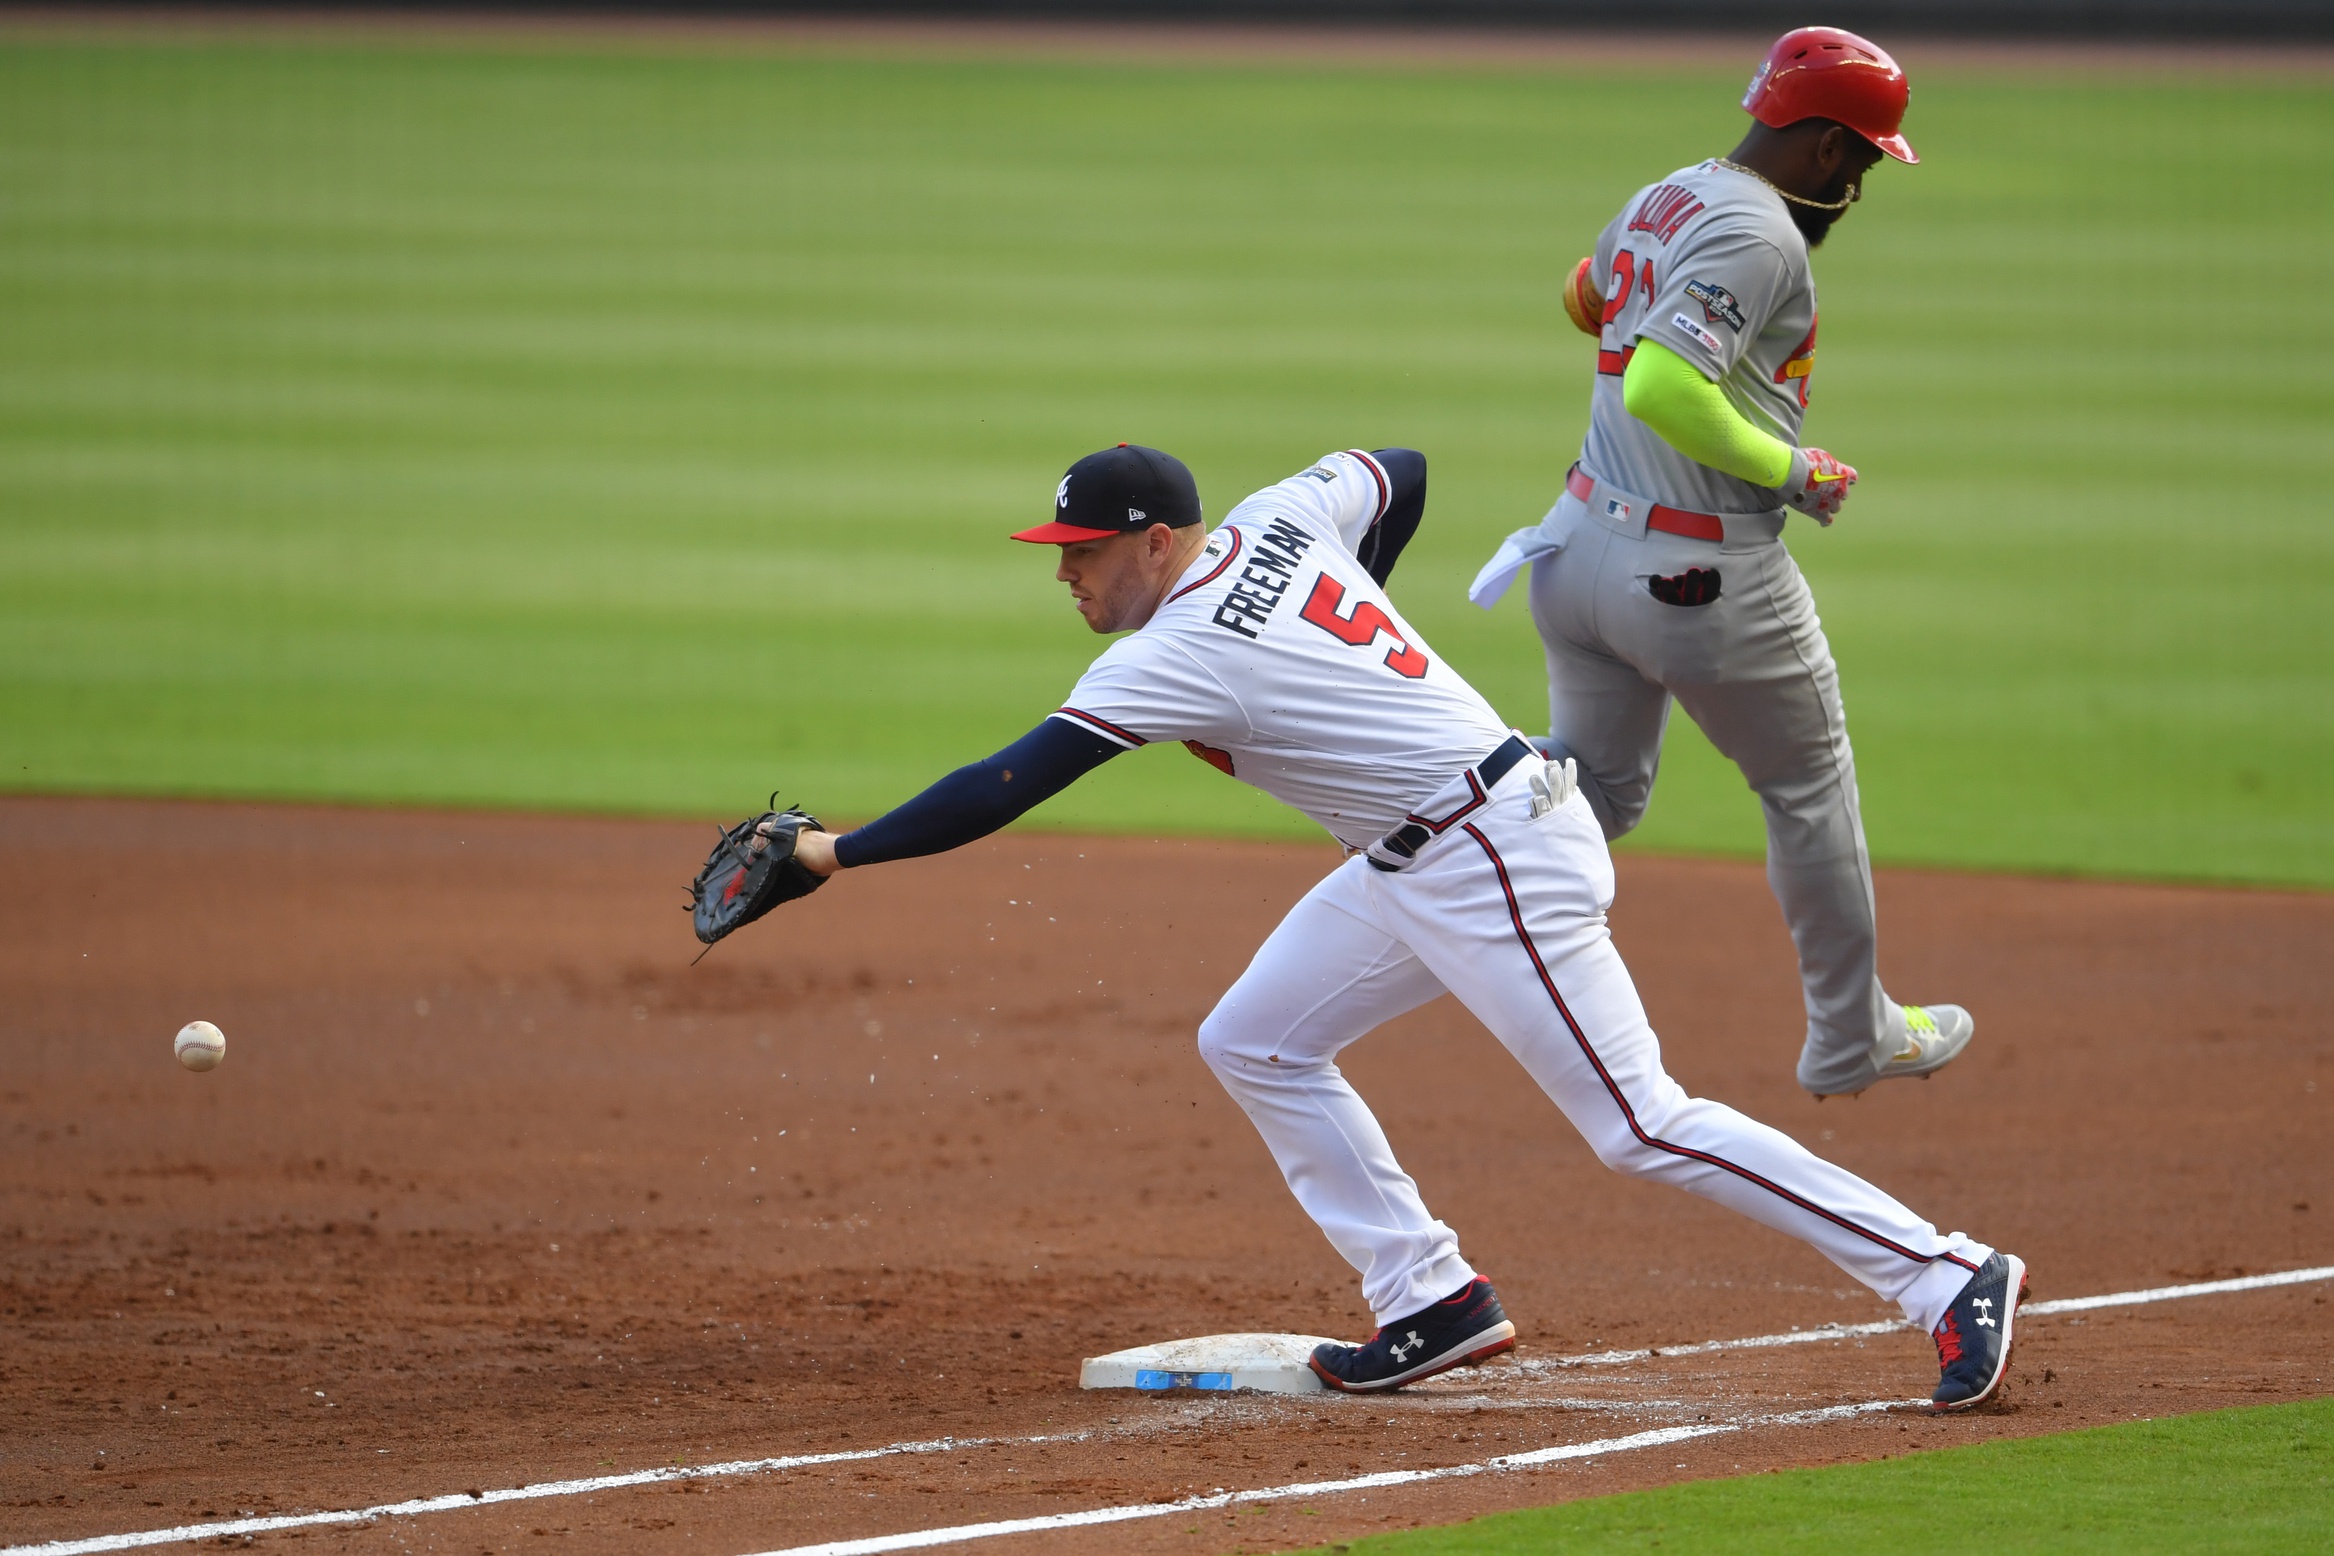 WATCH: Freddie Freeman already in Gold Glove form with stunning double play